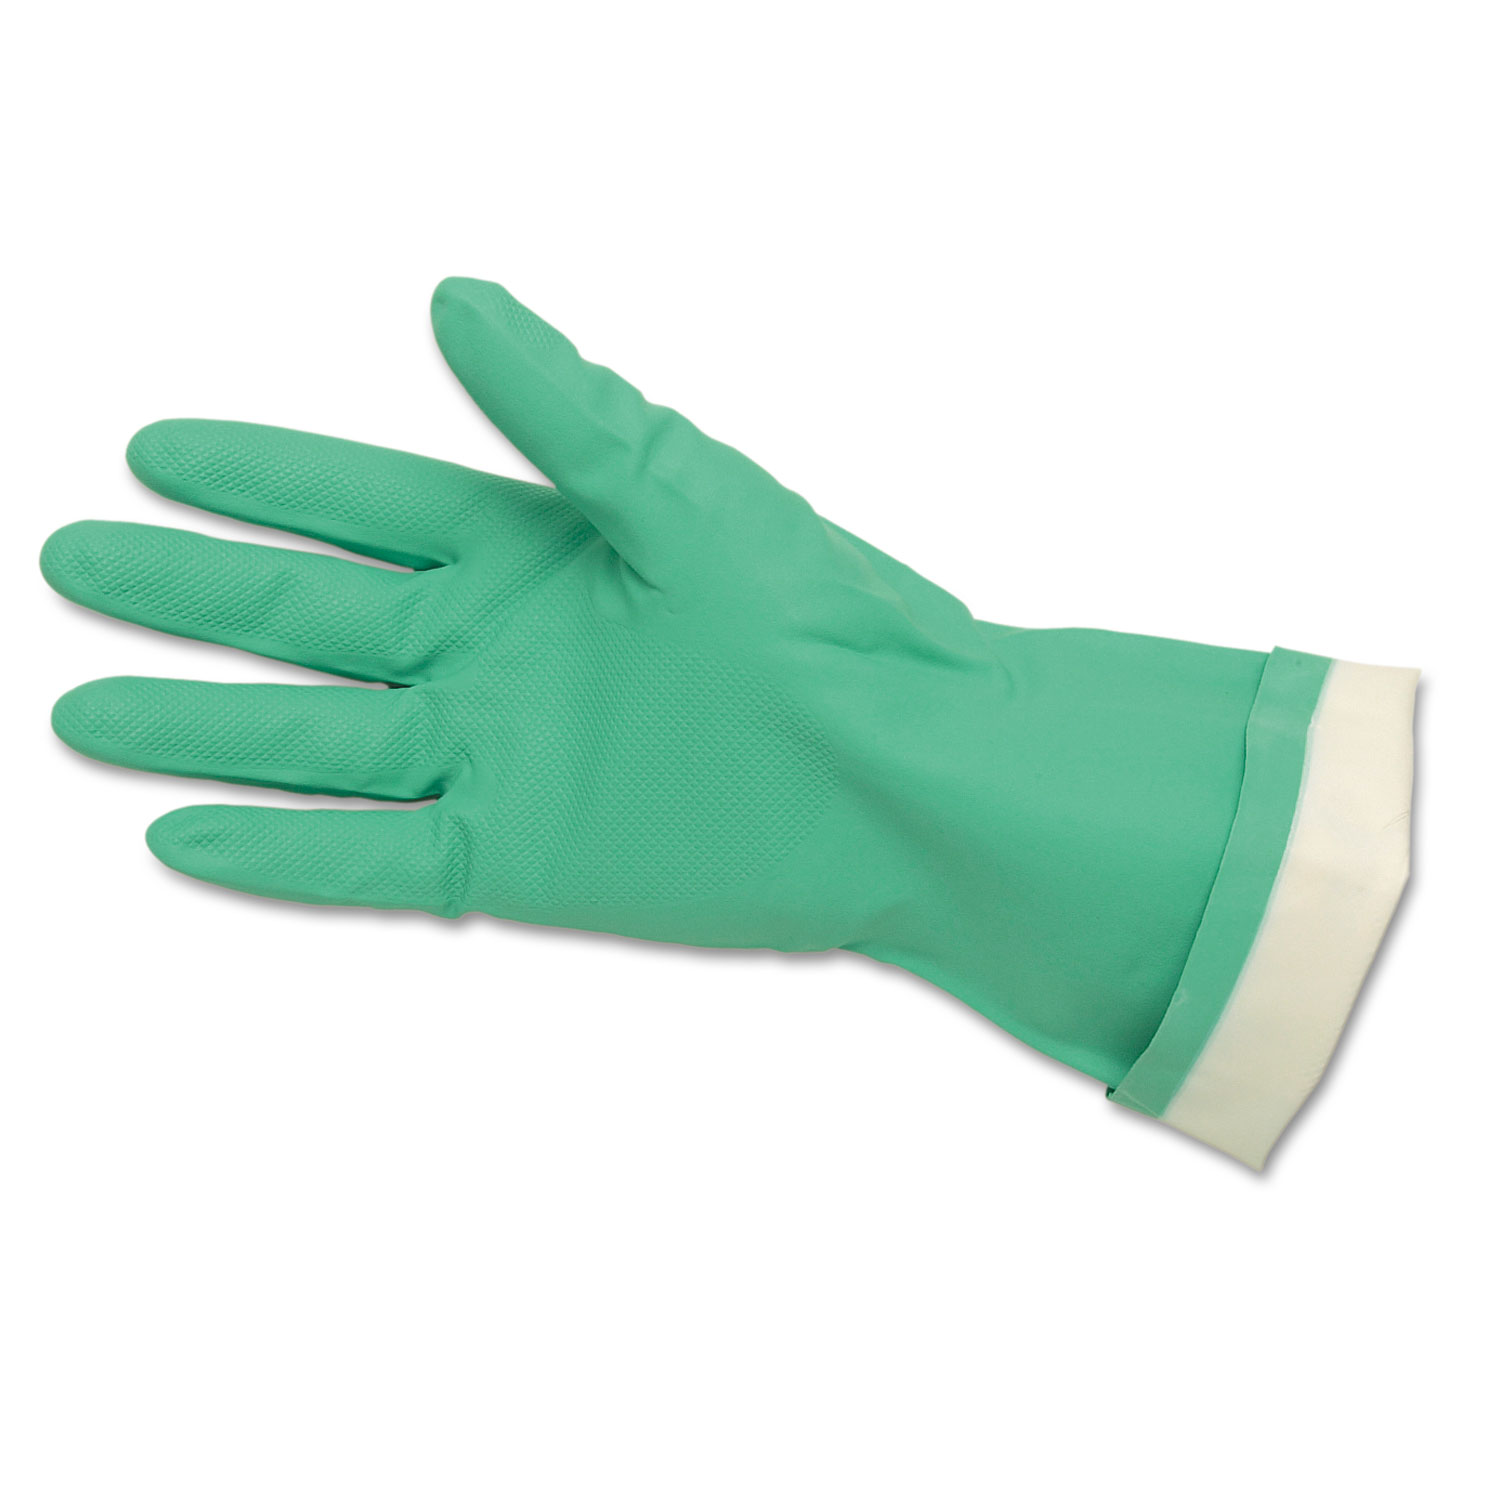  MCR Safety 5319E Flock-Lined Nitrile Gloves, One Size, Green, 12 Pairs (CRW5319E) 